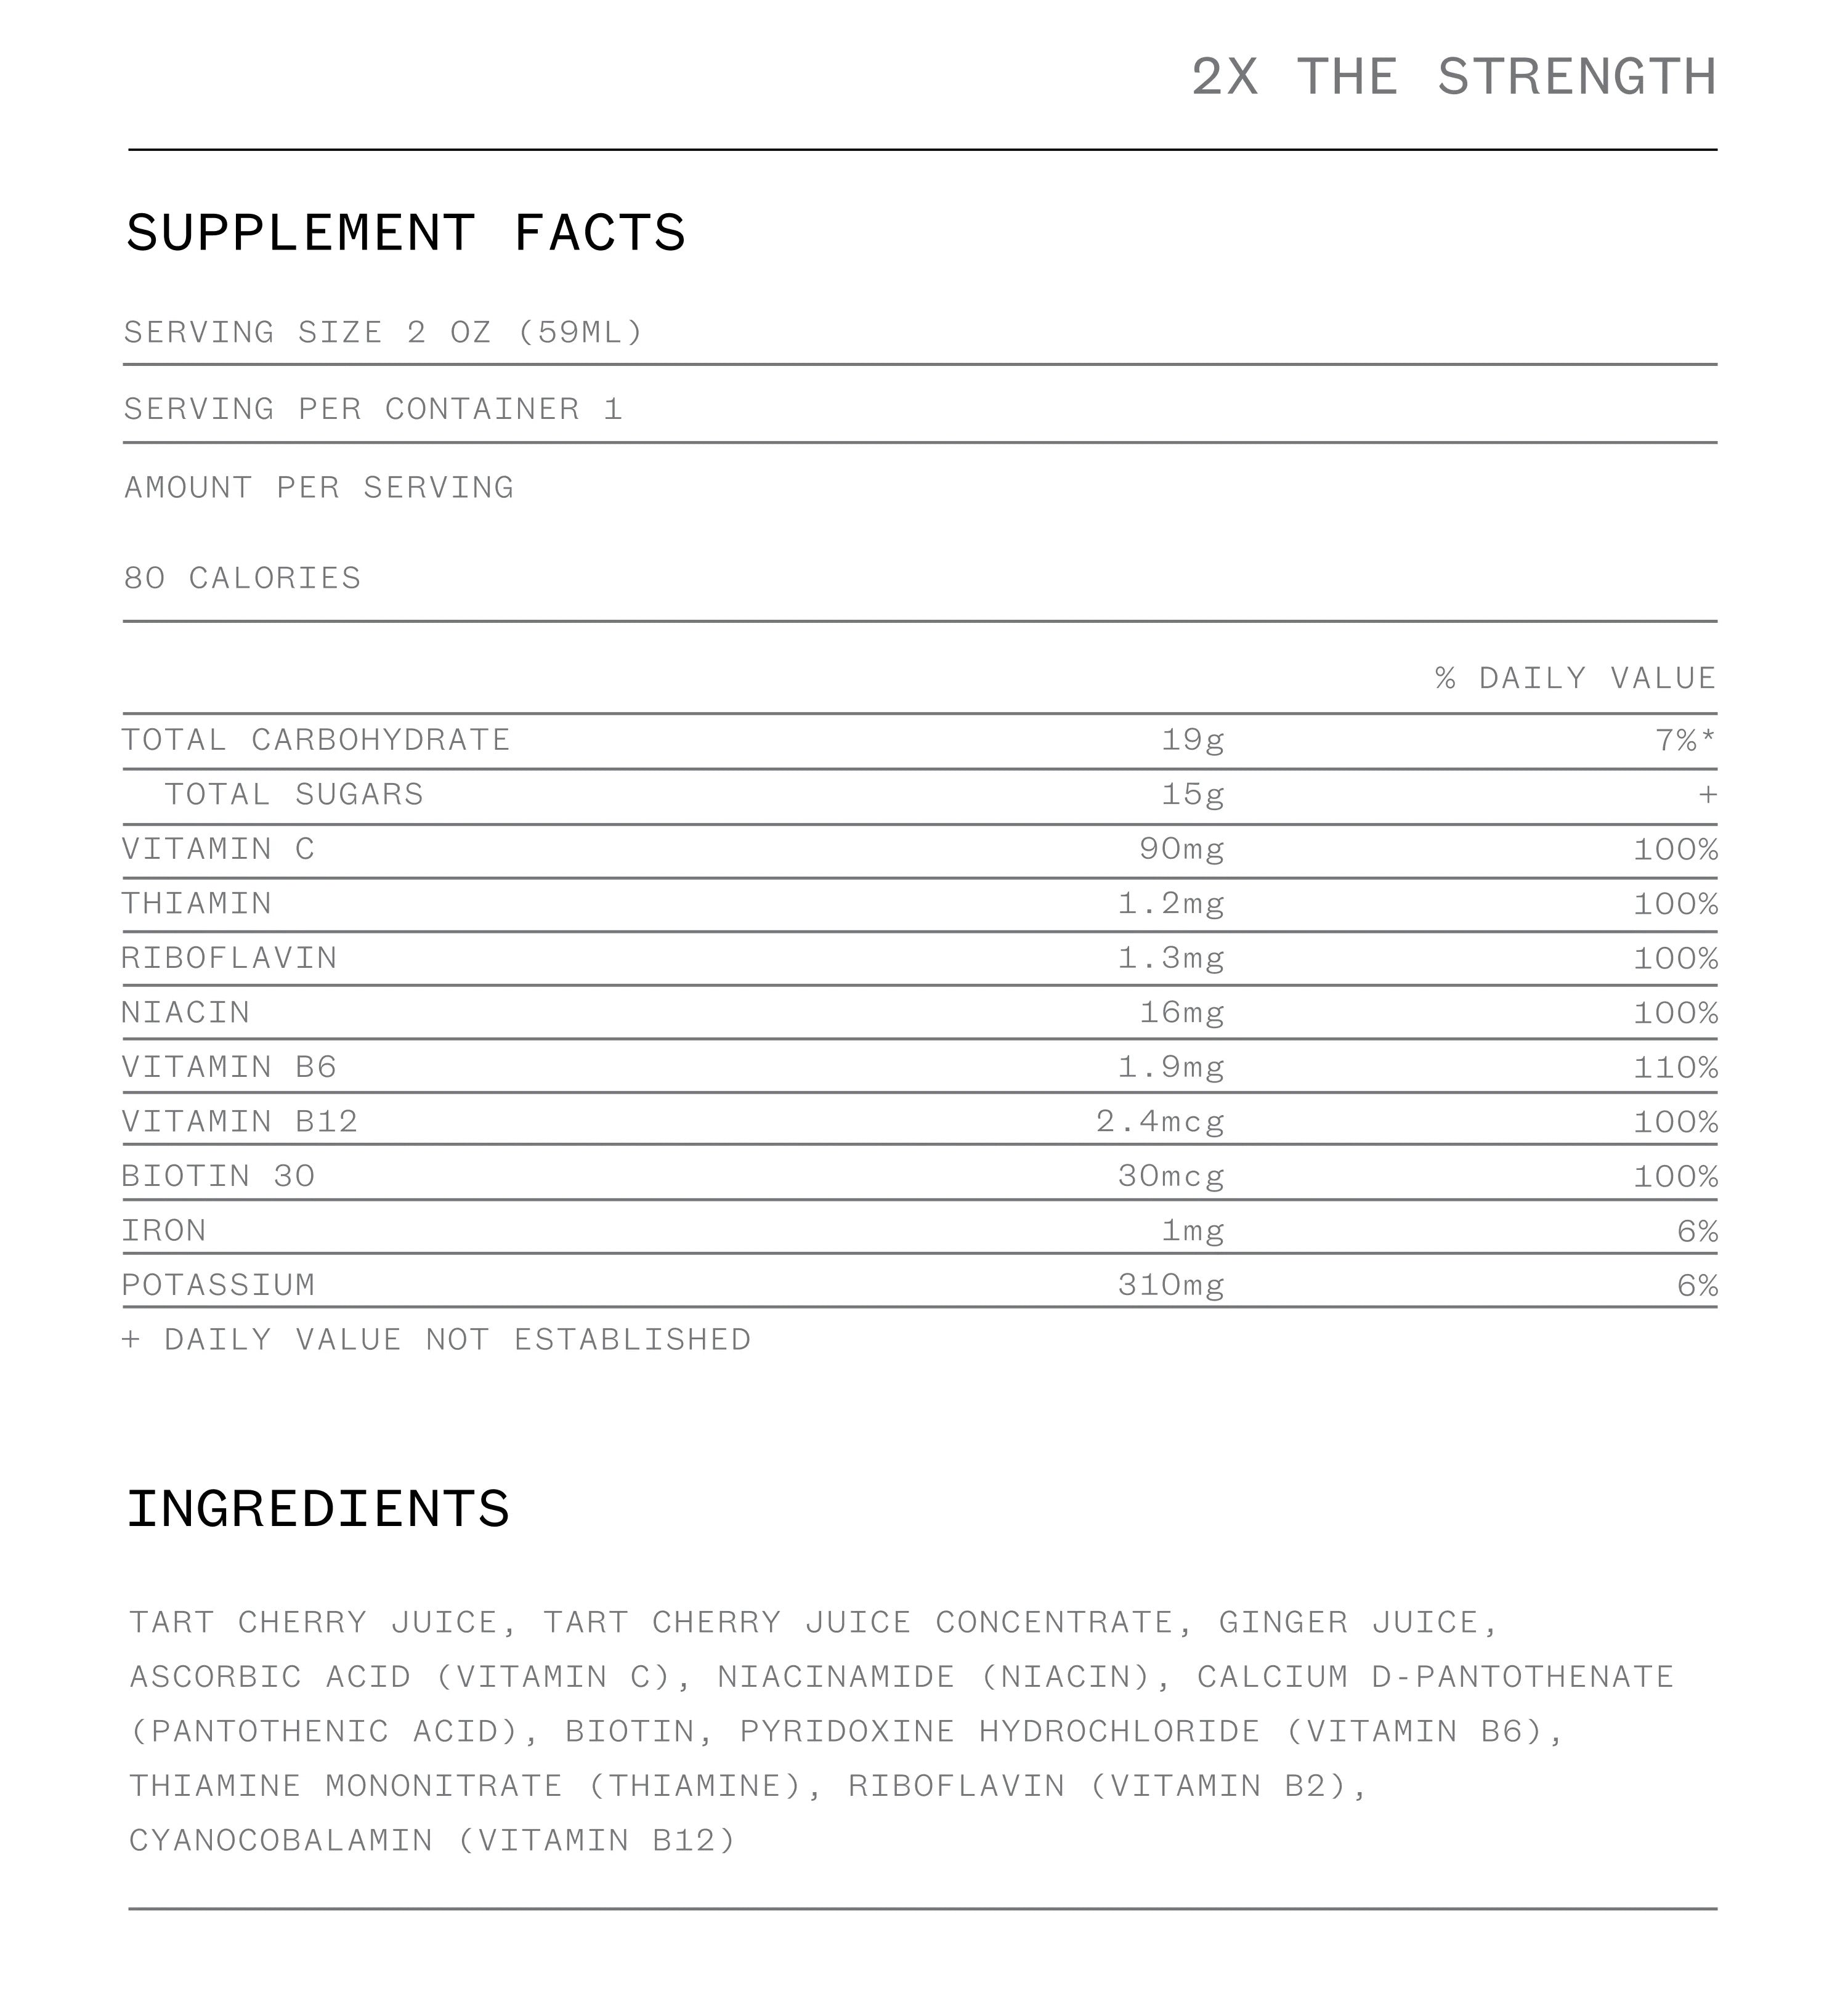 Supplemental Facts and Ingredients